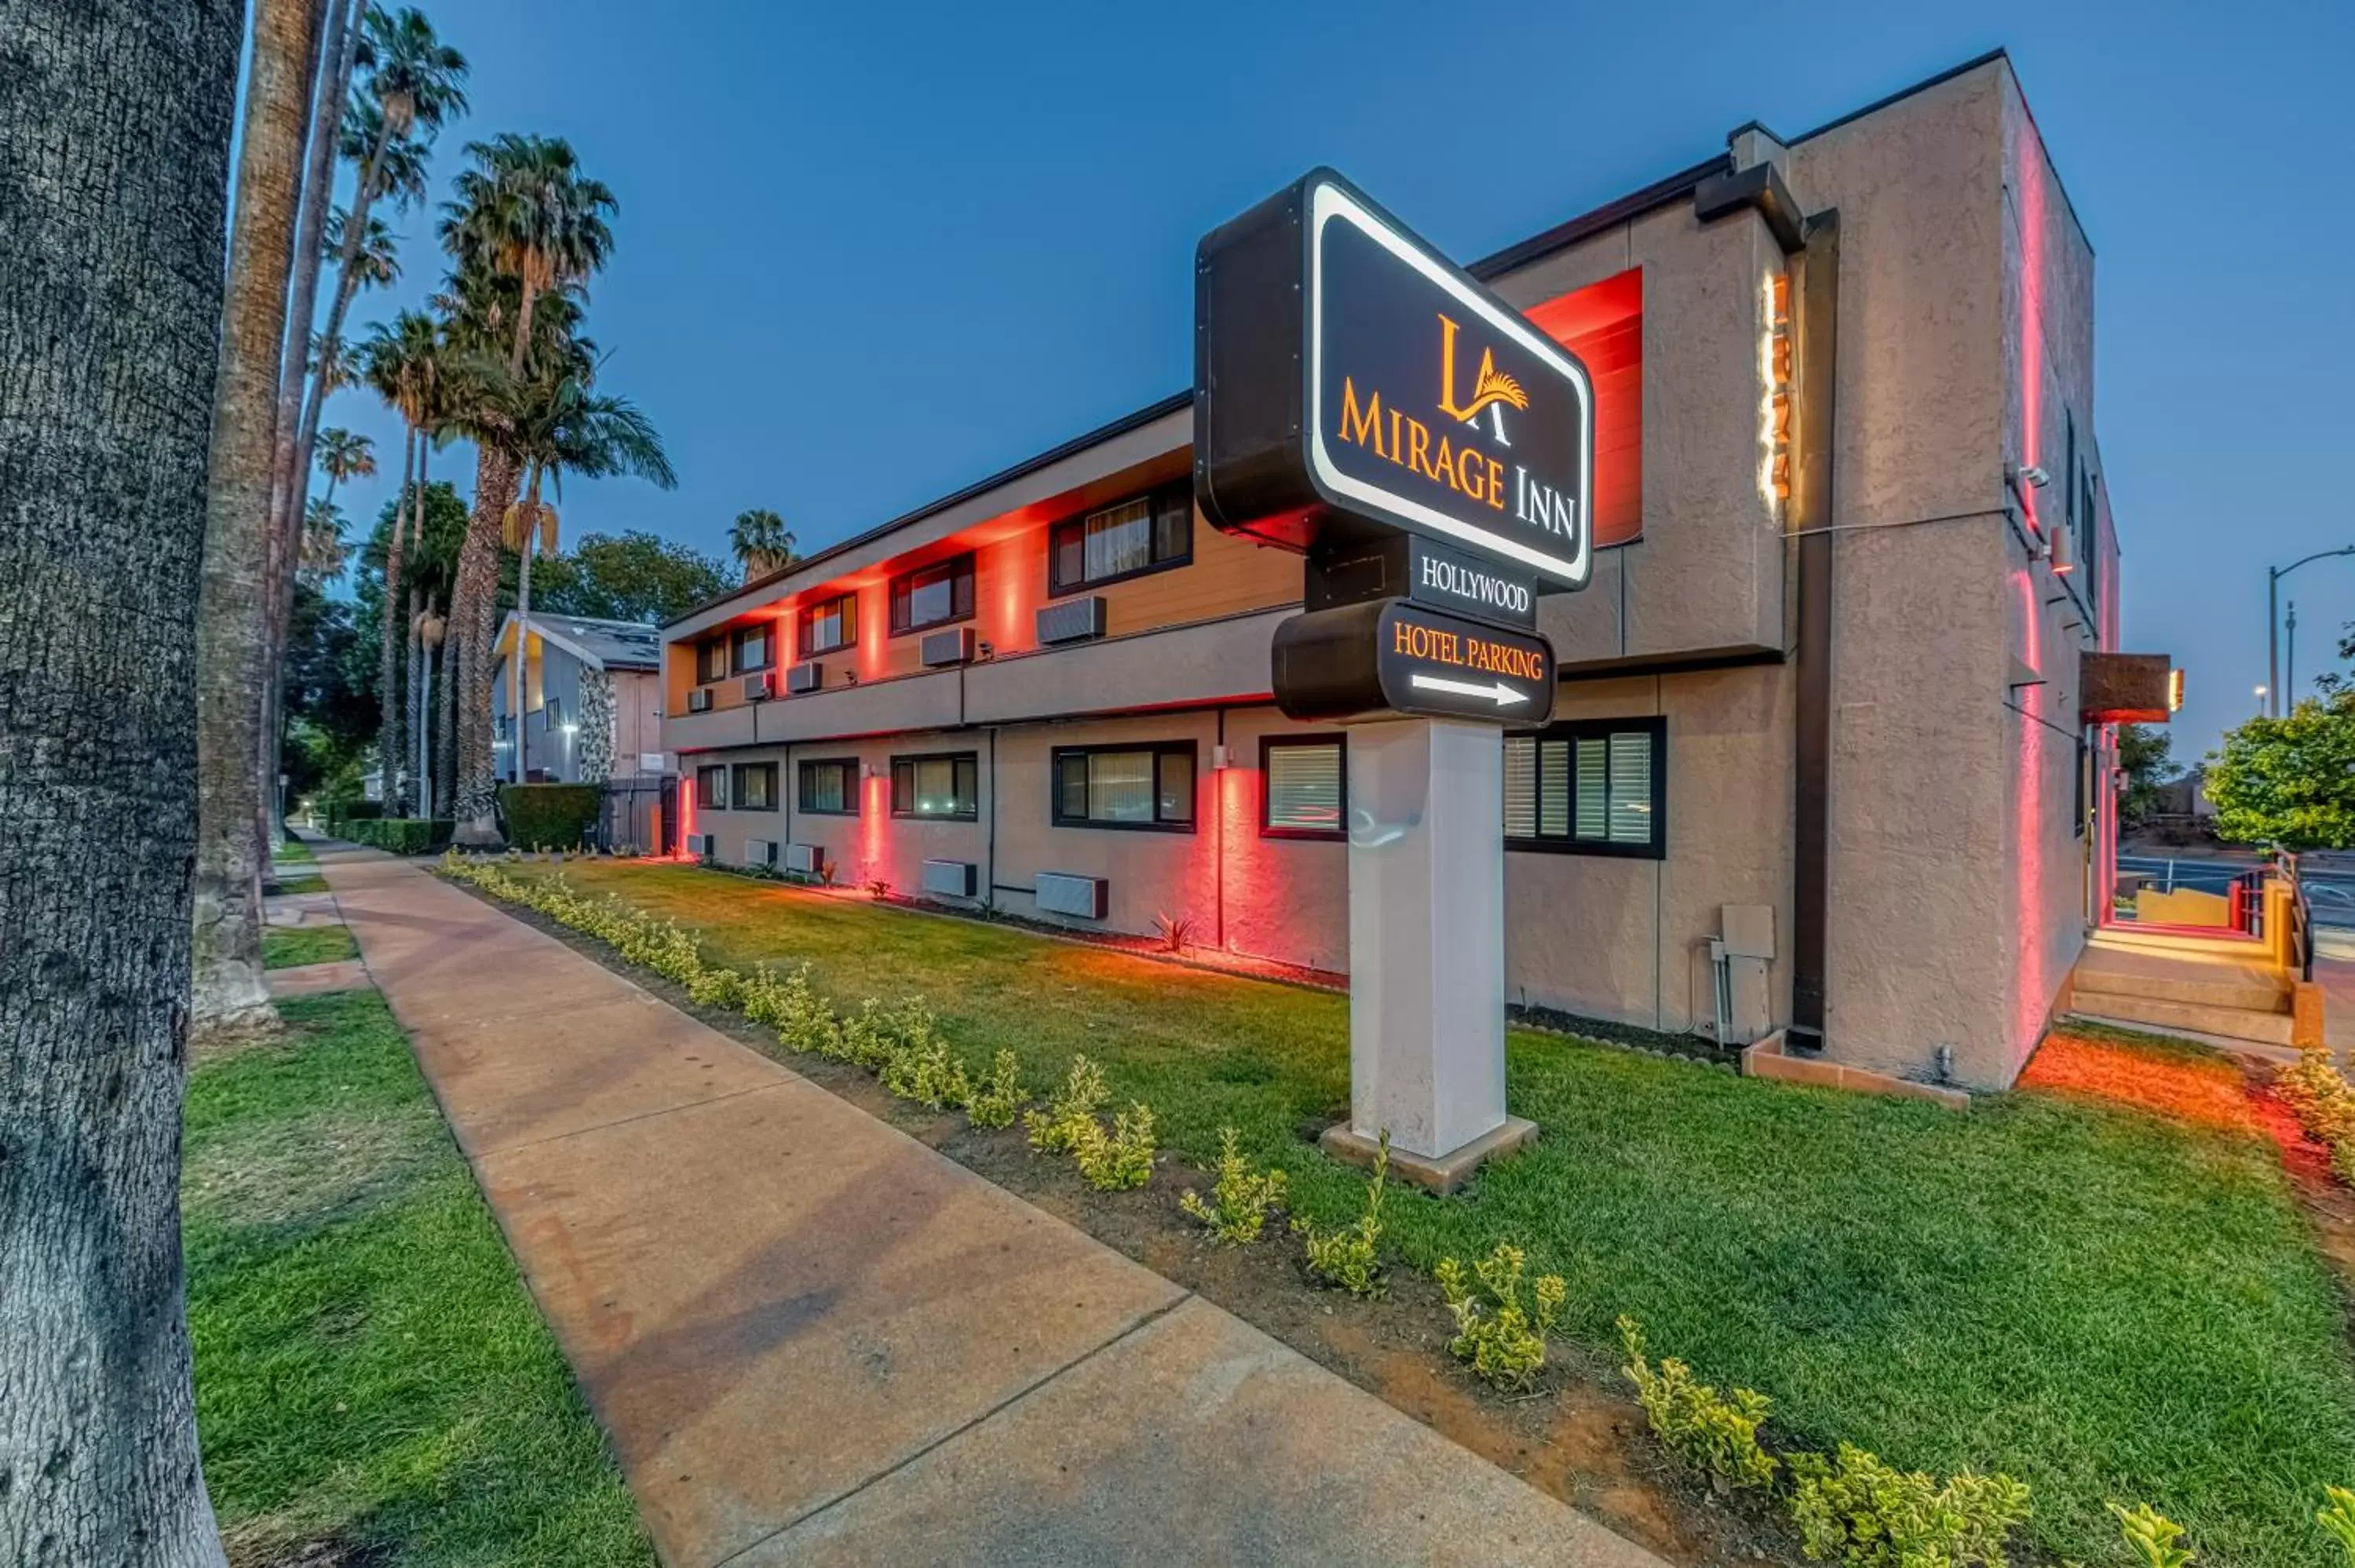 Property Building in La Mirage Inn - Hollywood